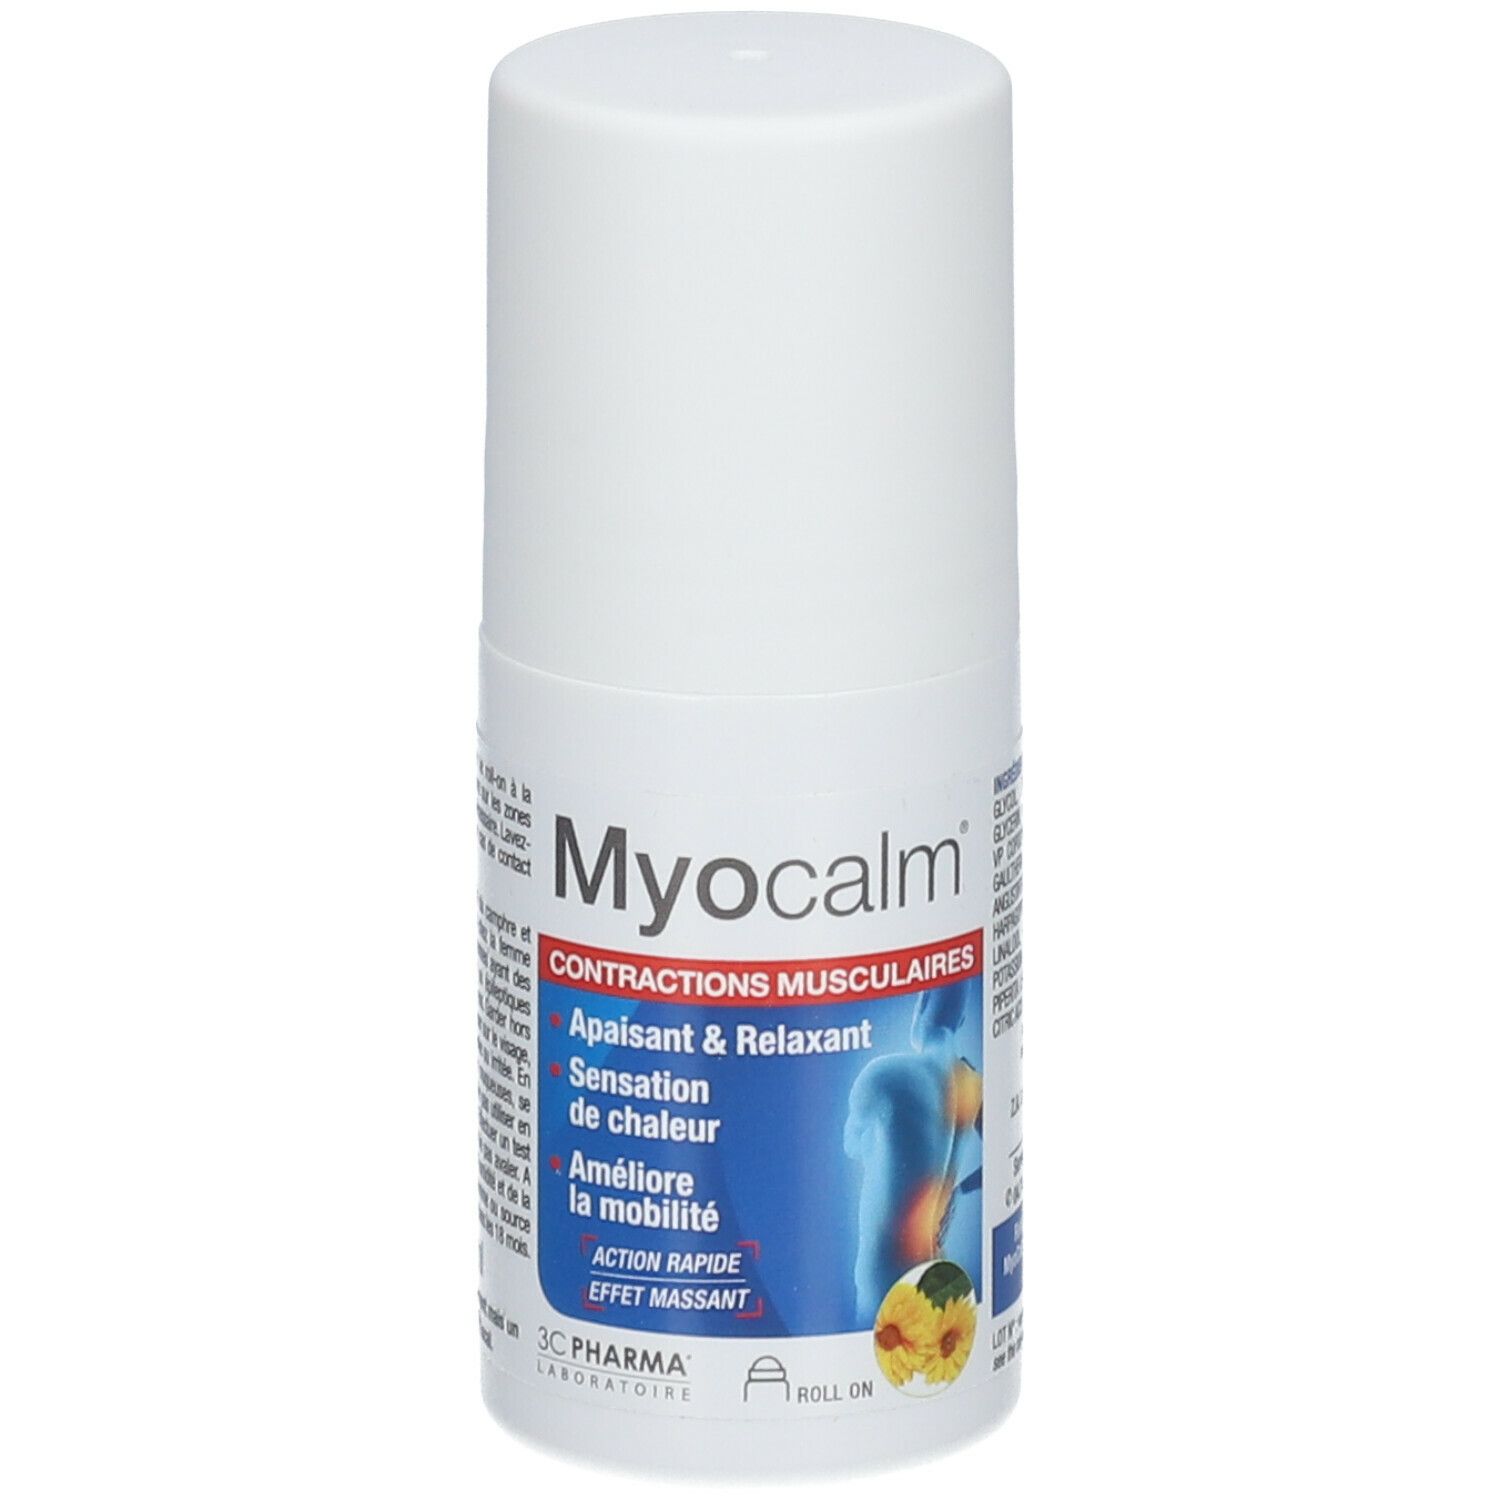 3C Pharma® Myocalm® Contractions musculaires Roll-on